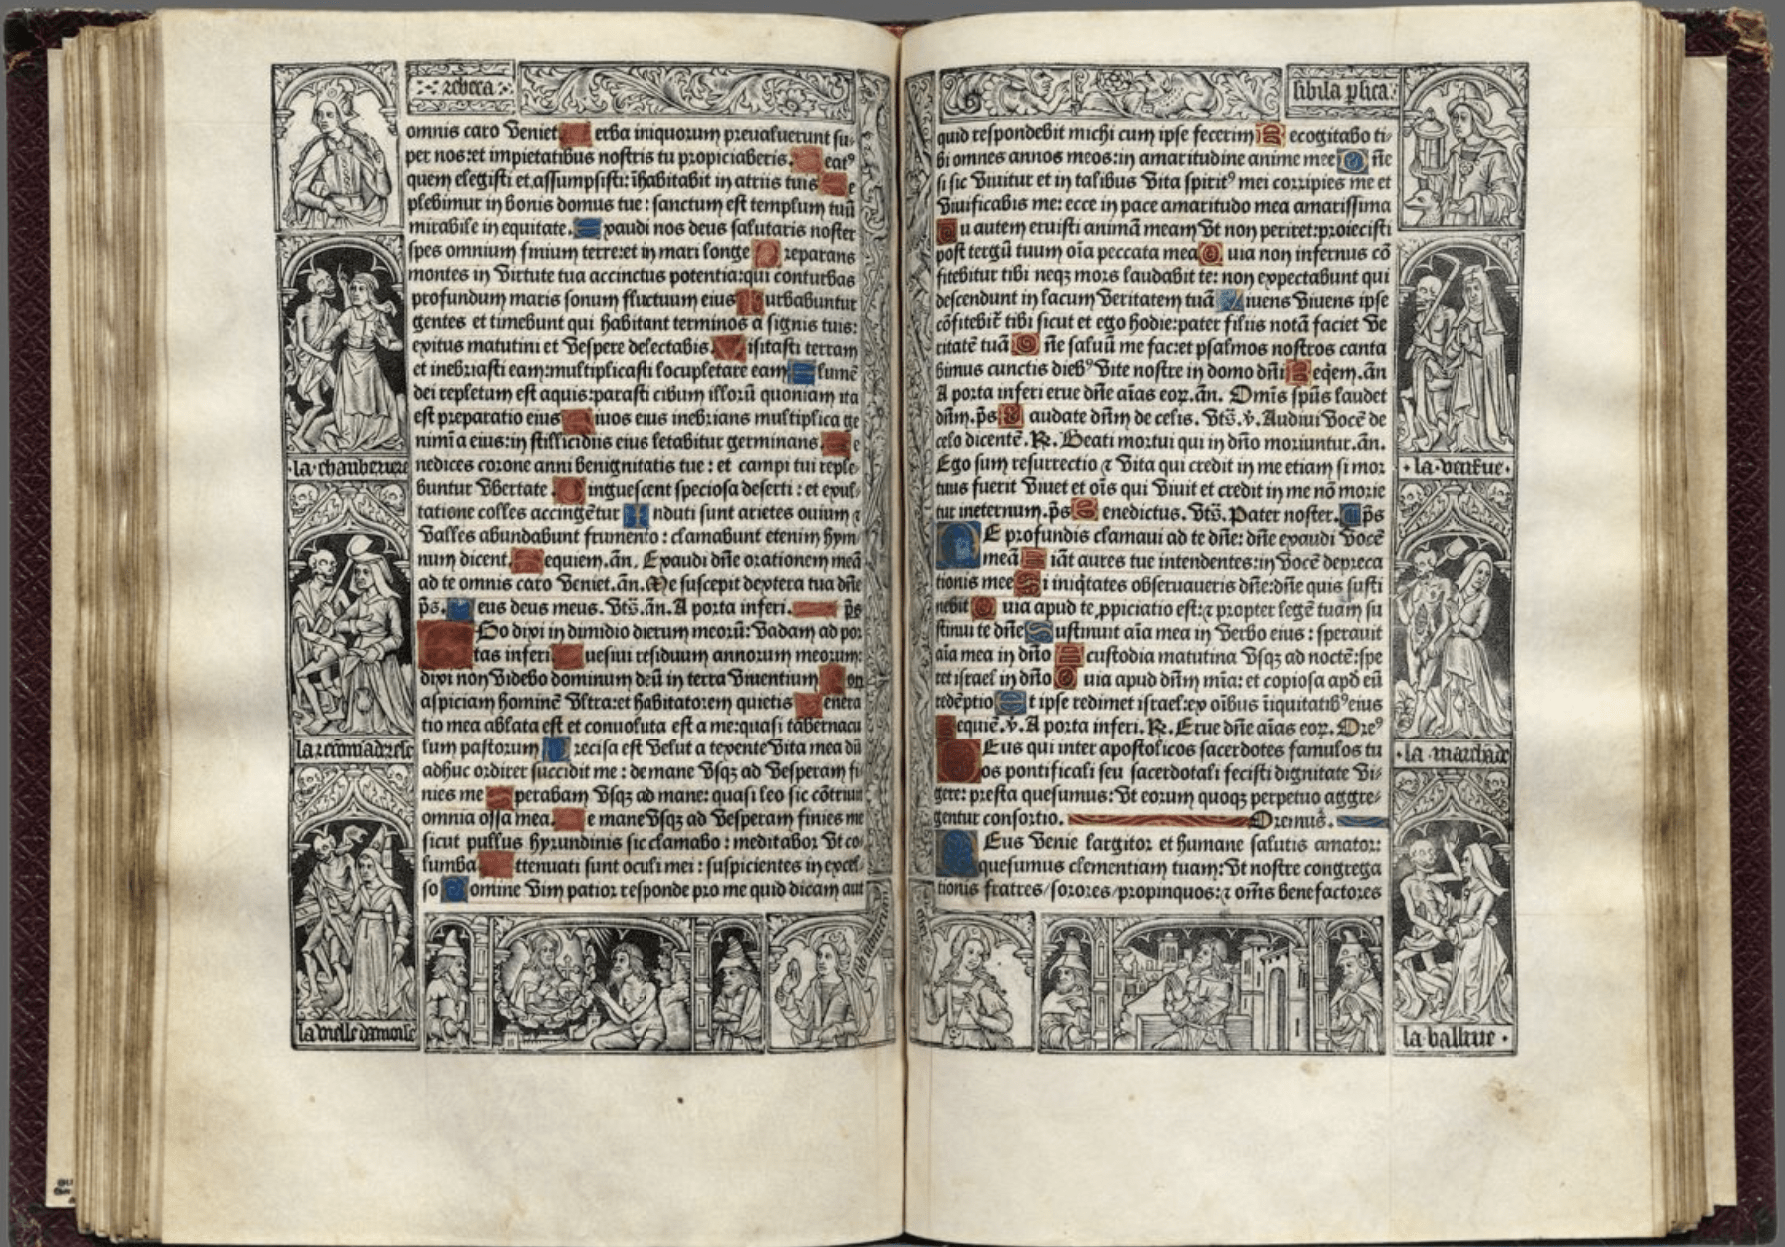 Illuminated manuscript pages titled "La Danse Macabre" from a 1497 Book of Hours called the "Hore intemerate Virginis Marie secundum usum Romane curie incipiunt feliciter."